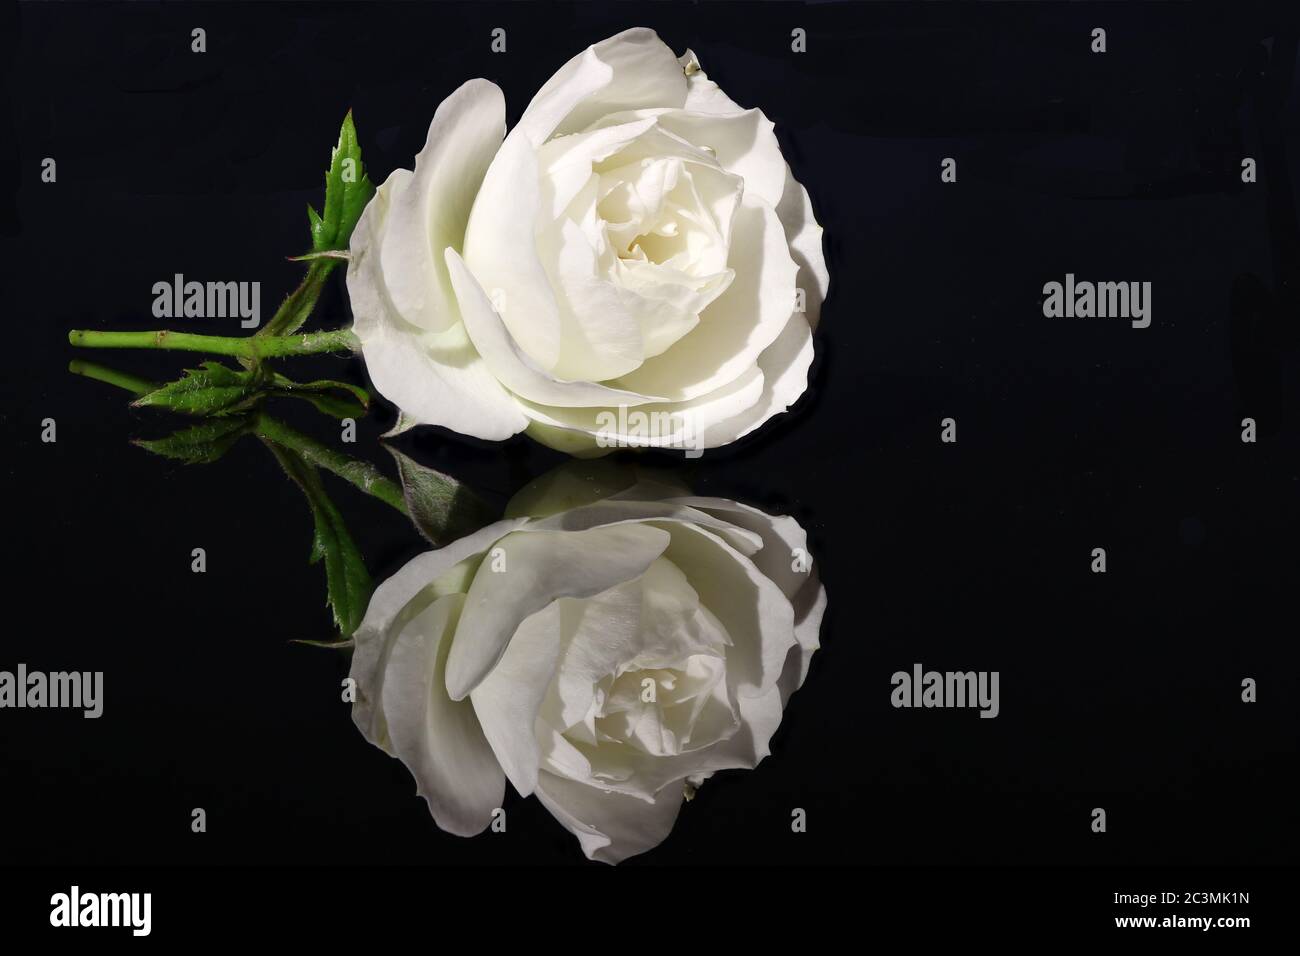 Close-up of white China rose blossom with mirror image on a black glass plate Stock Photo